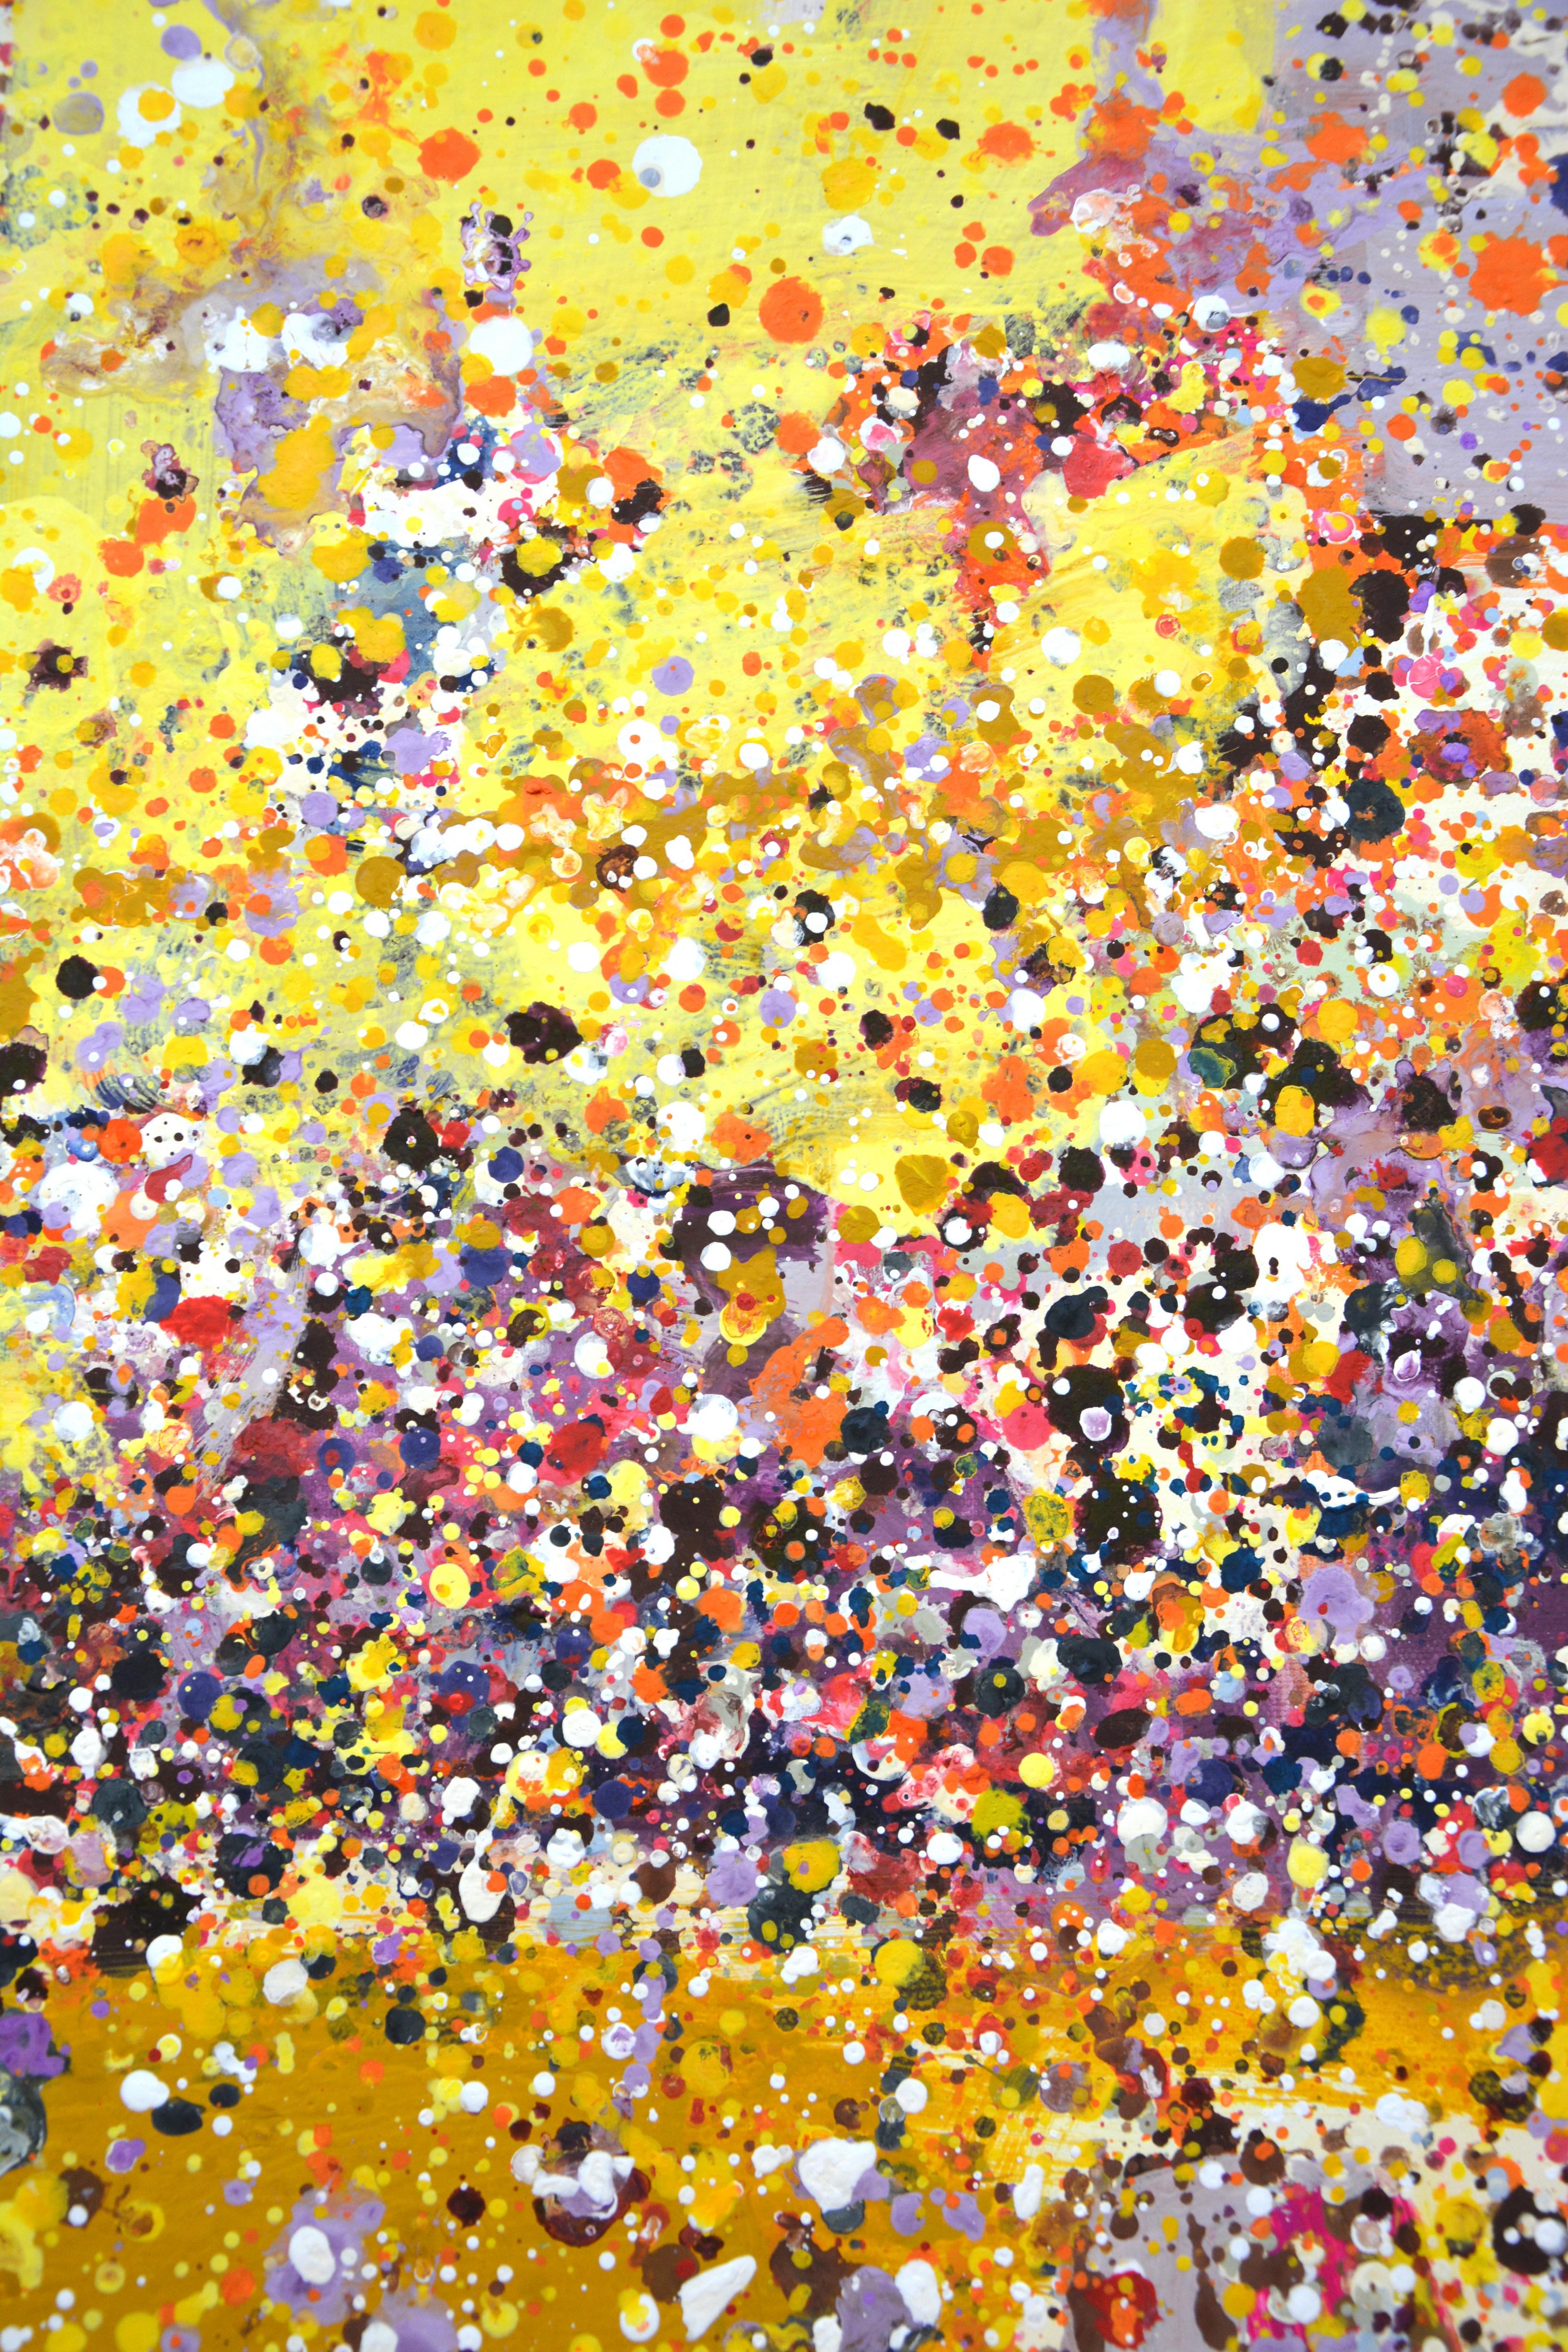 Metamorphoses 2. An expressive, modern abstract painting created by drops and splashes of paint that sparkles and shimmers! The colors are superimposed on each other and also correspond to different points. Many colored drops, yellow, orange, red,